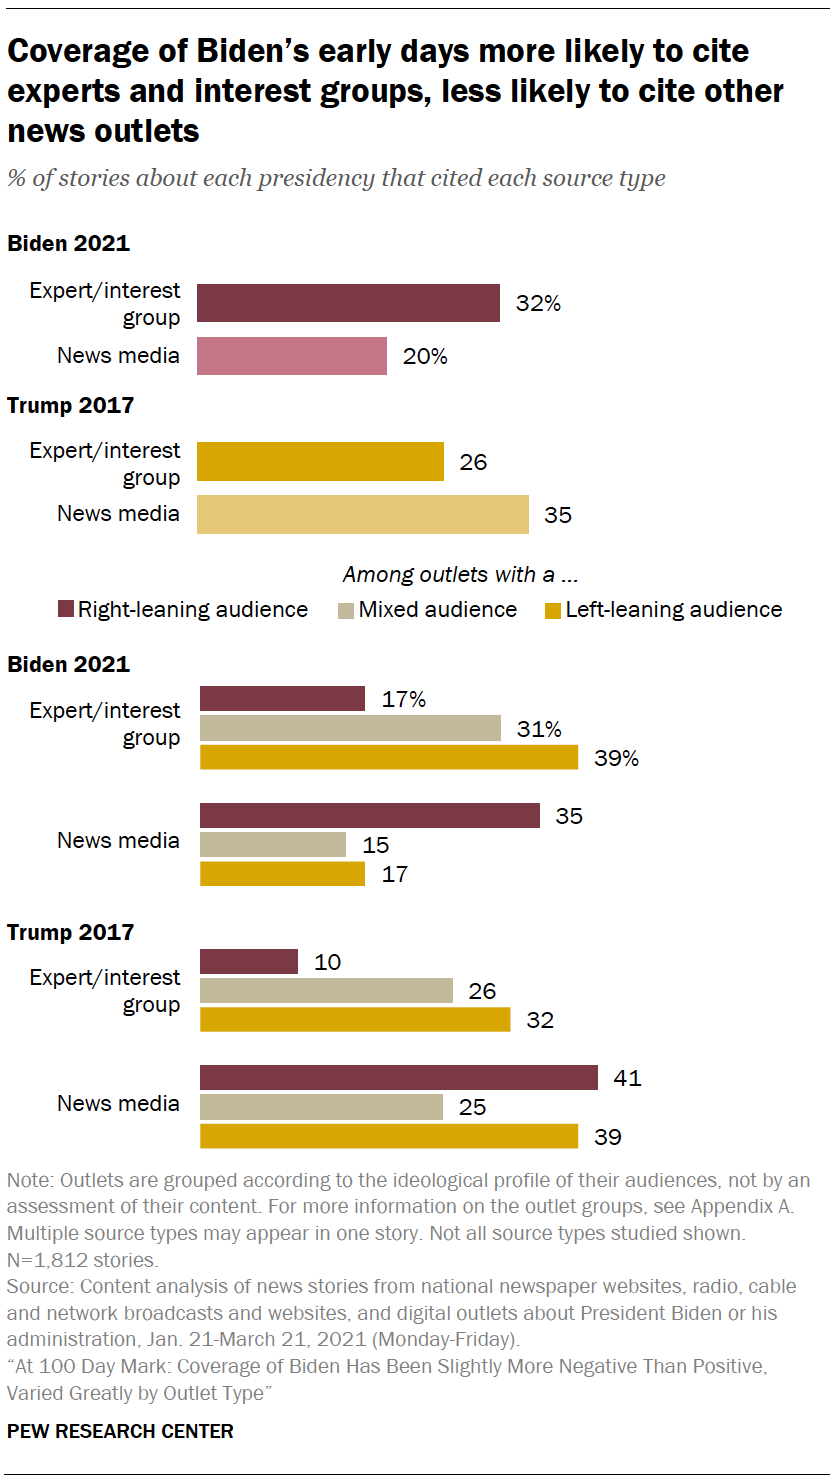 Coverage of Biden’s early days more likely to cite experts and interest groups, less likely to cite other news outlets